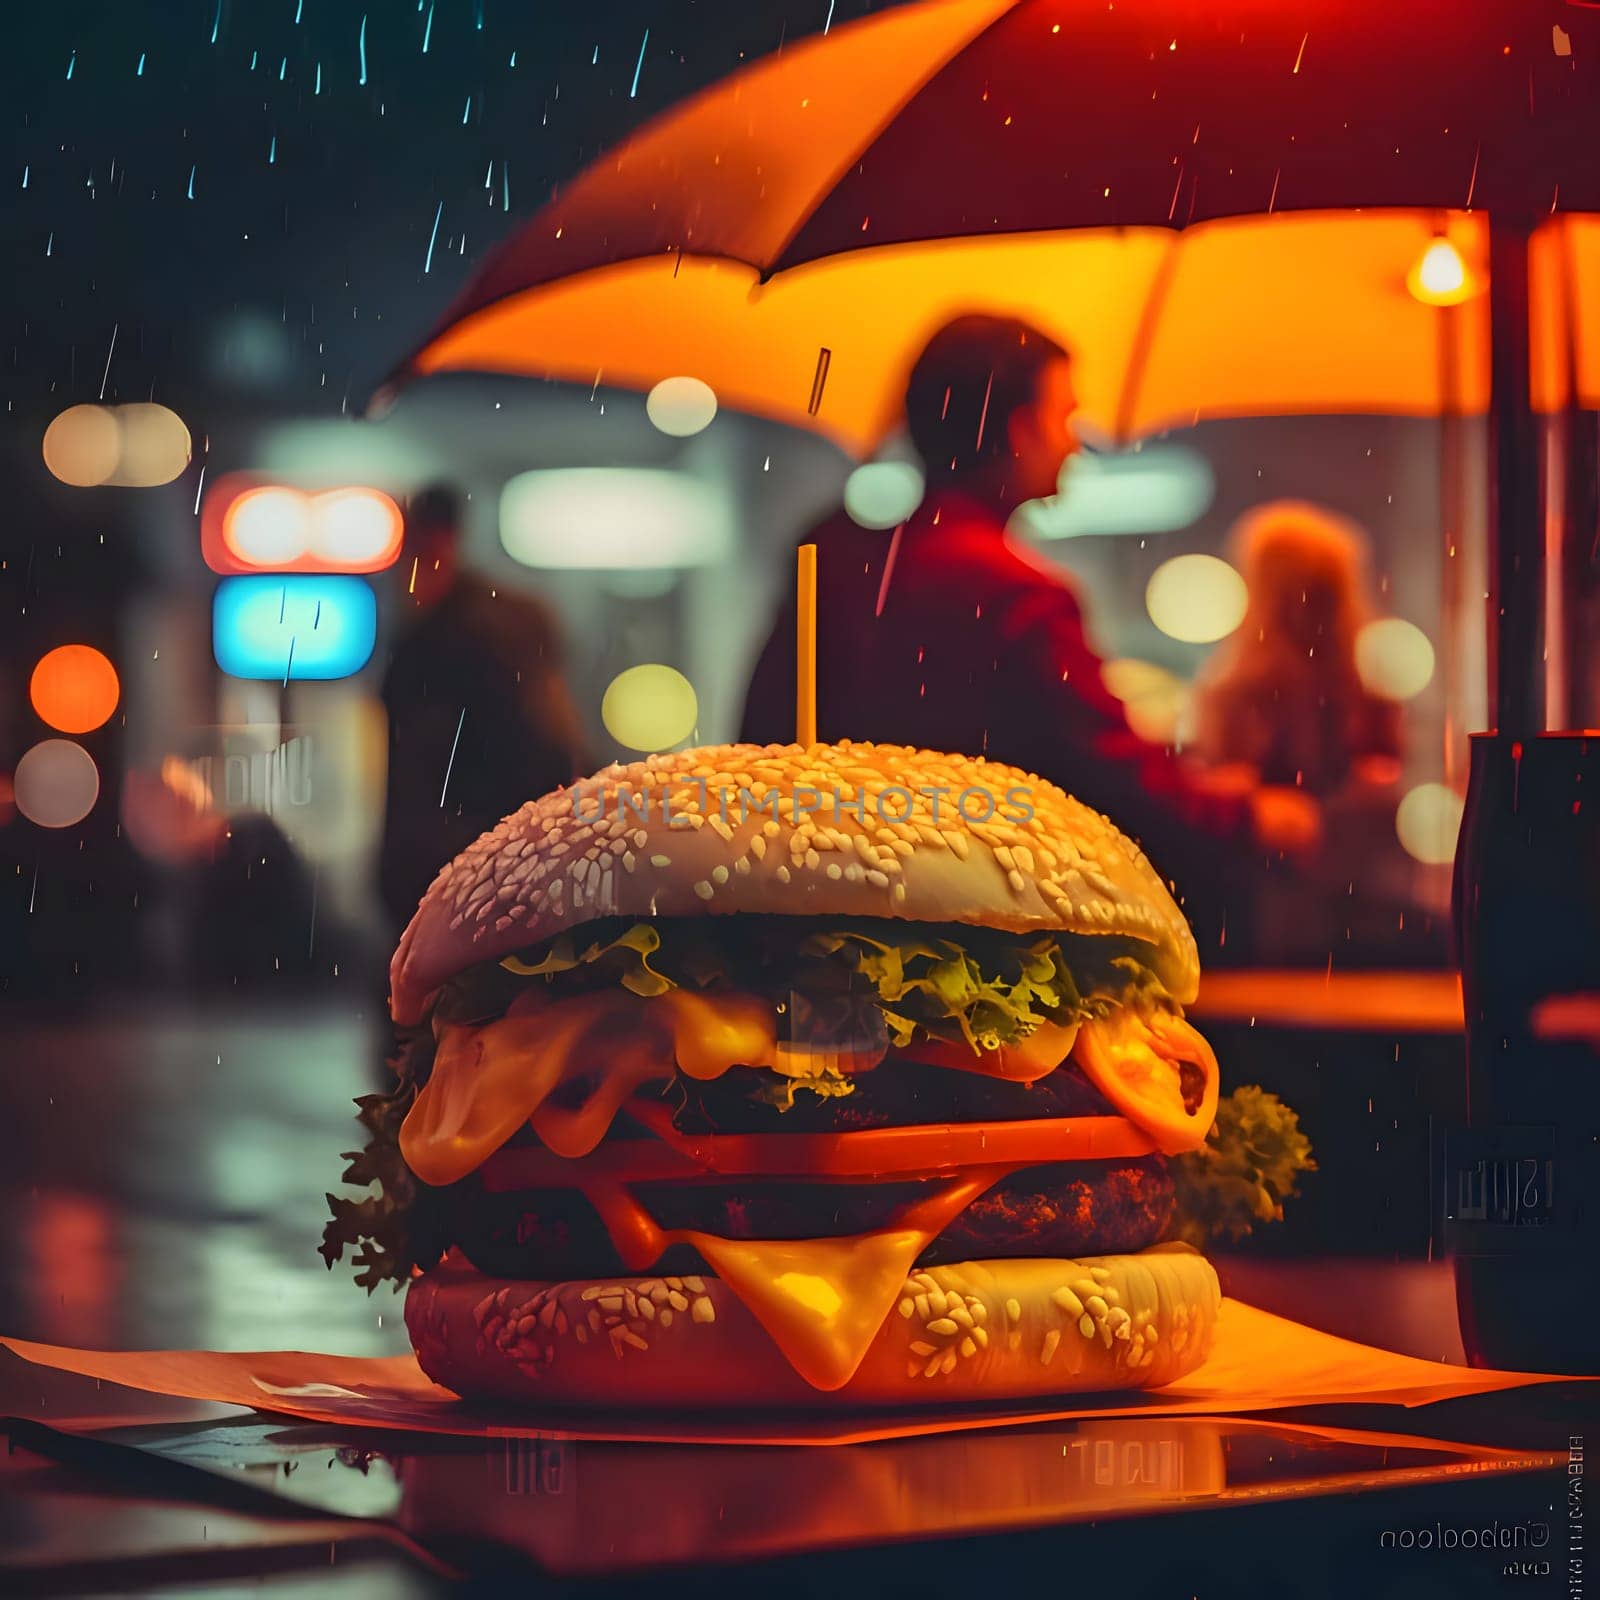 Hamburger, cheeseburger, chicken burger, burger with lettuce, cheese, bacon, pickle, tomato, sauce, onion. Illustration against a background of people, falling rain. Tasty.